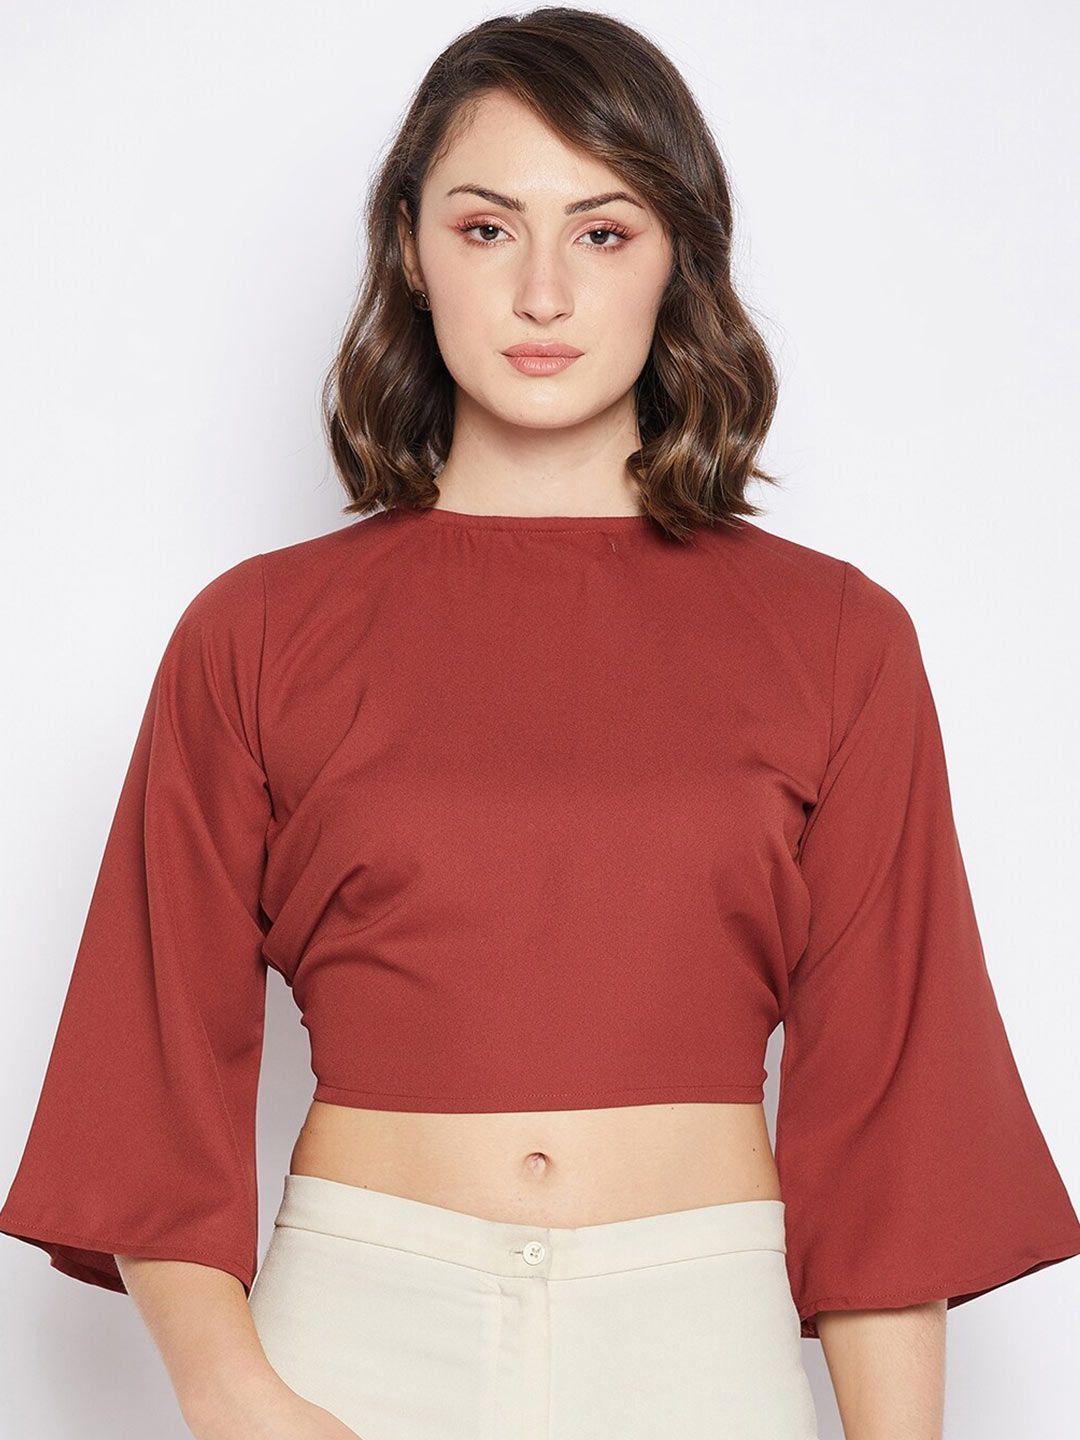 fashfun-round-neck-flared-sleeves-styled-back-crop-top